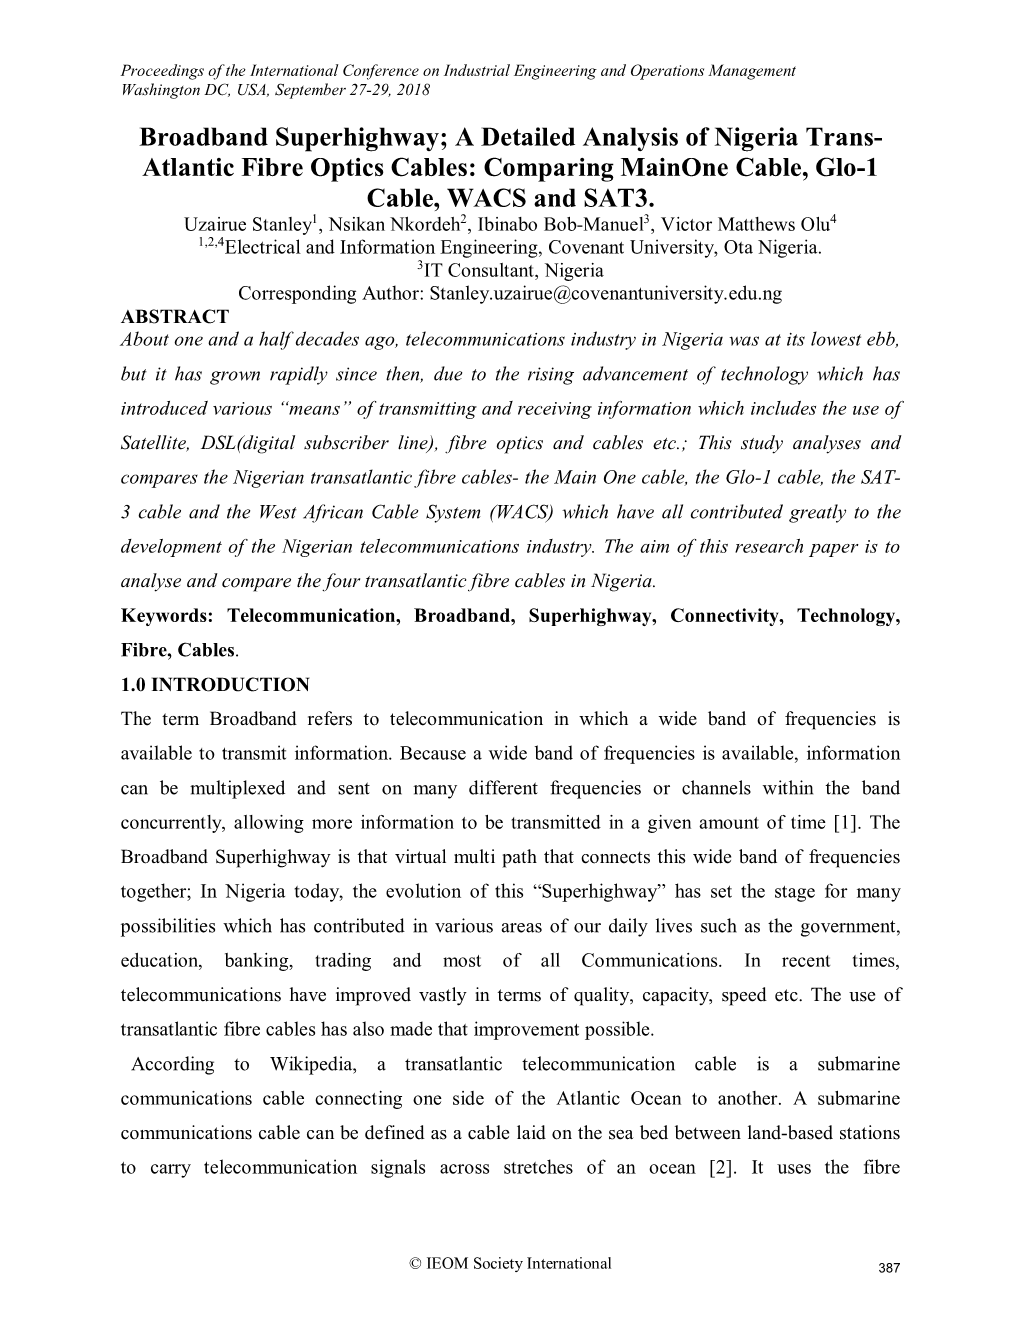 A Detailed Analysis of Nigeria Trans- Atlantic Fibre Optics Cables: Comparing Mainone Cable, Glo-1 Cable, WACS and SAT3